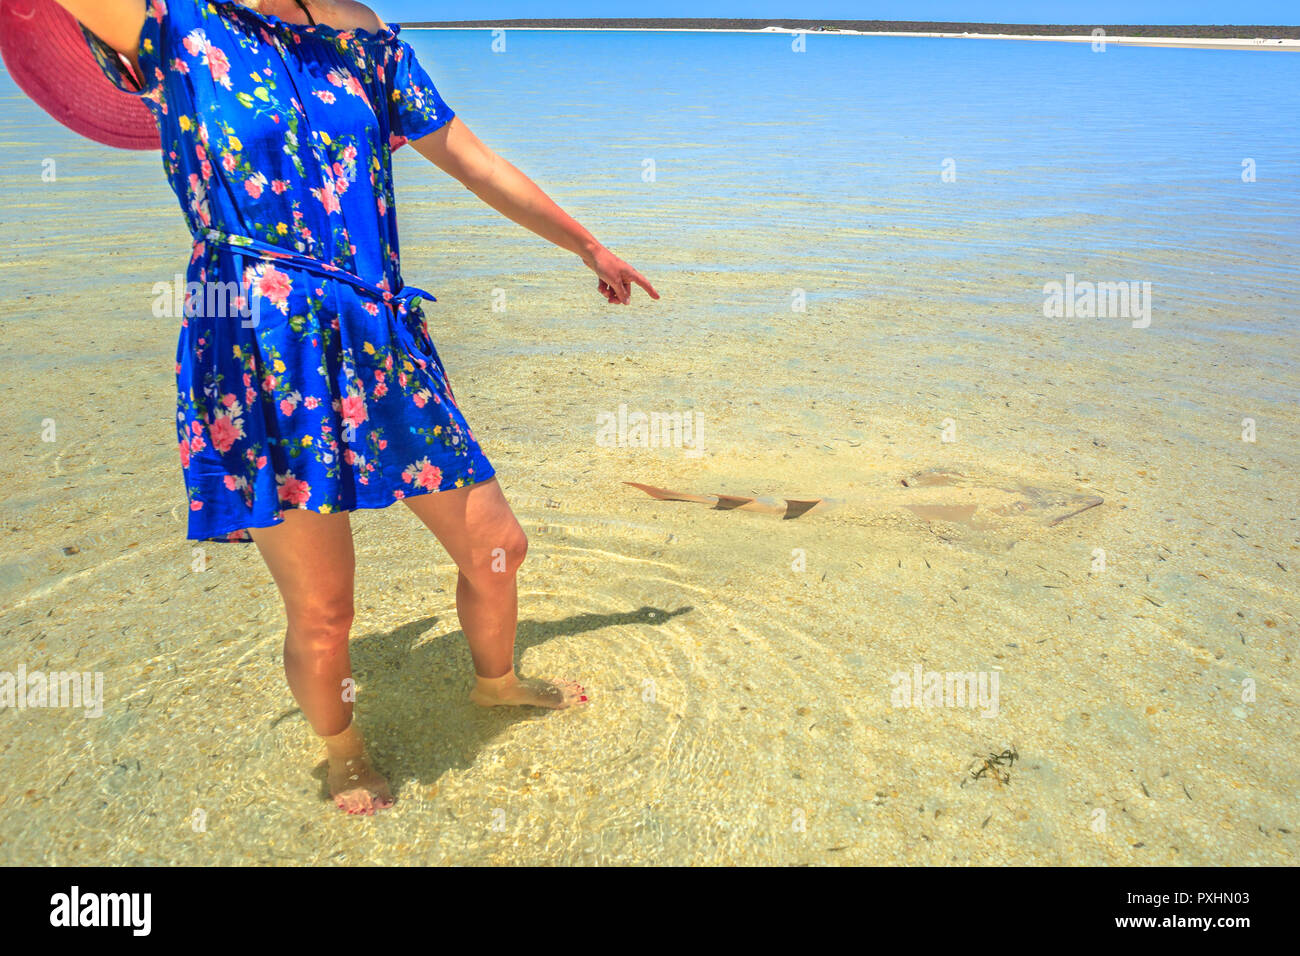 A tourist woman pointing at Guitarfish or Rhynchobatus Australiae at Shell Beach in Shark Bay Area. Shell Beach is famous for shells and clear waters. Coral coast in Western australia. Stock Photo